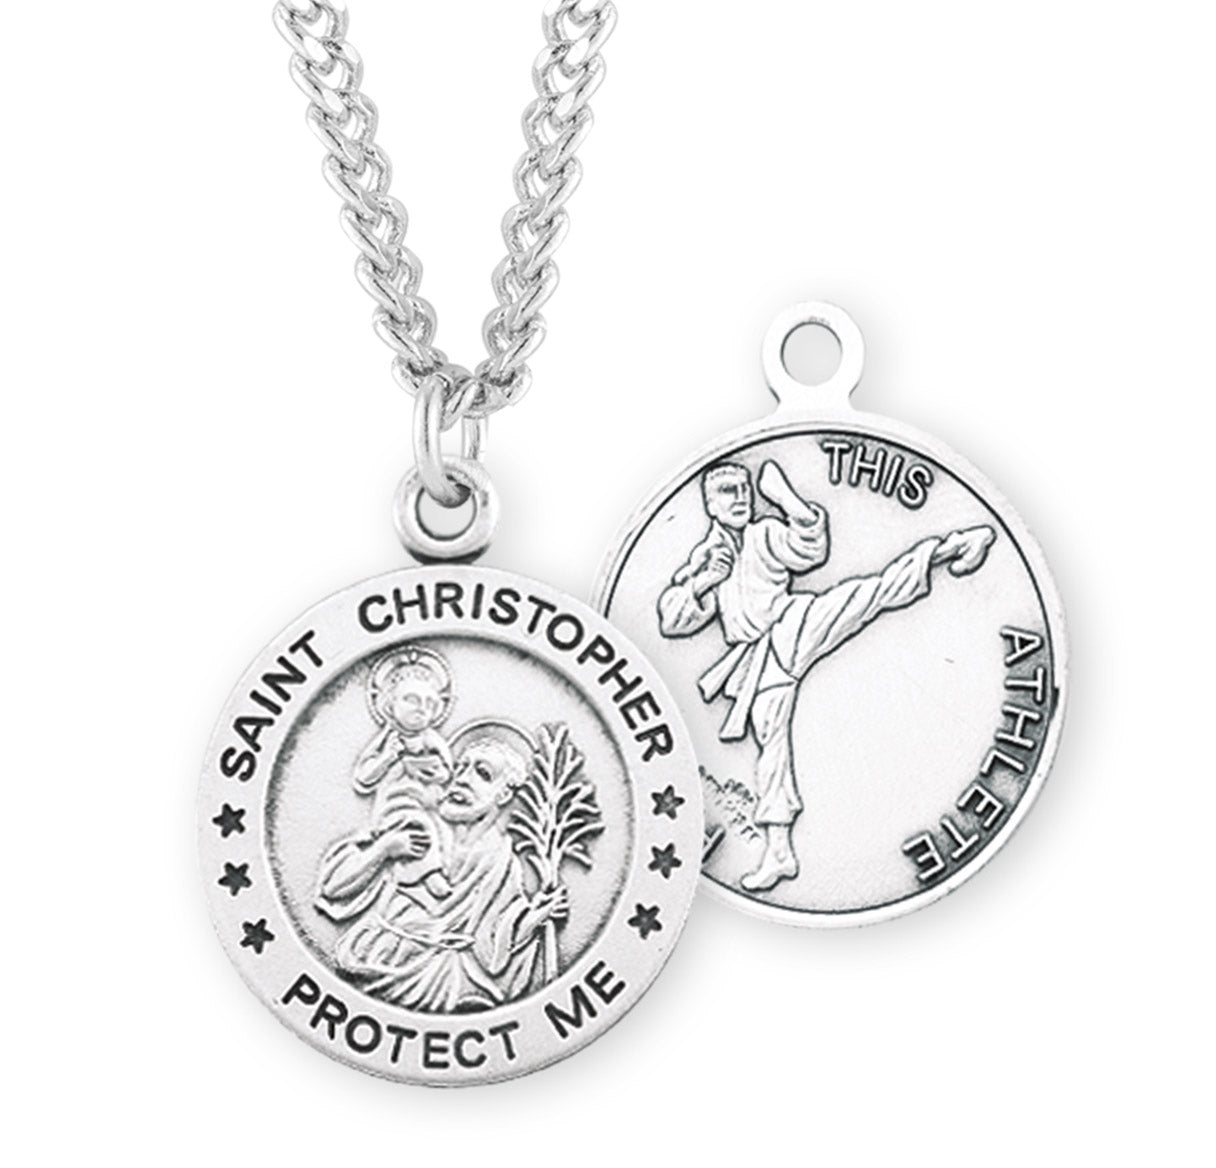 Saint Christopher Round Sterling Silver Martial Arts Male Athlete Medal